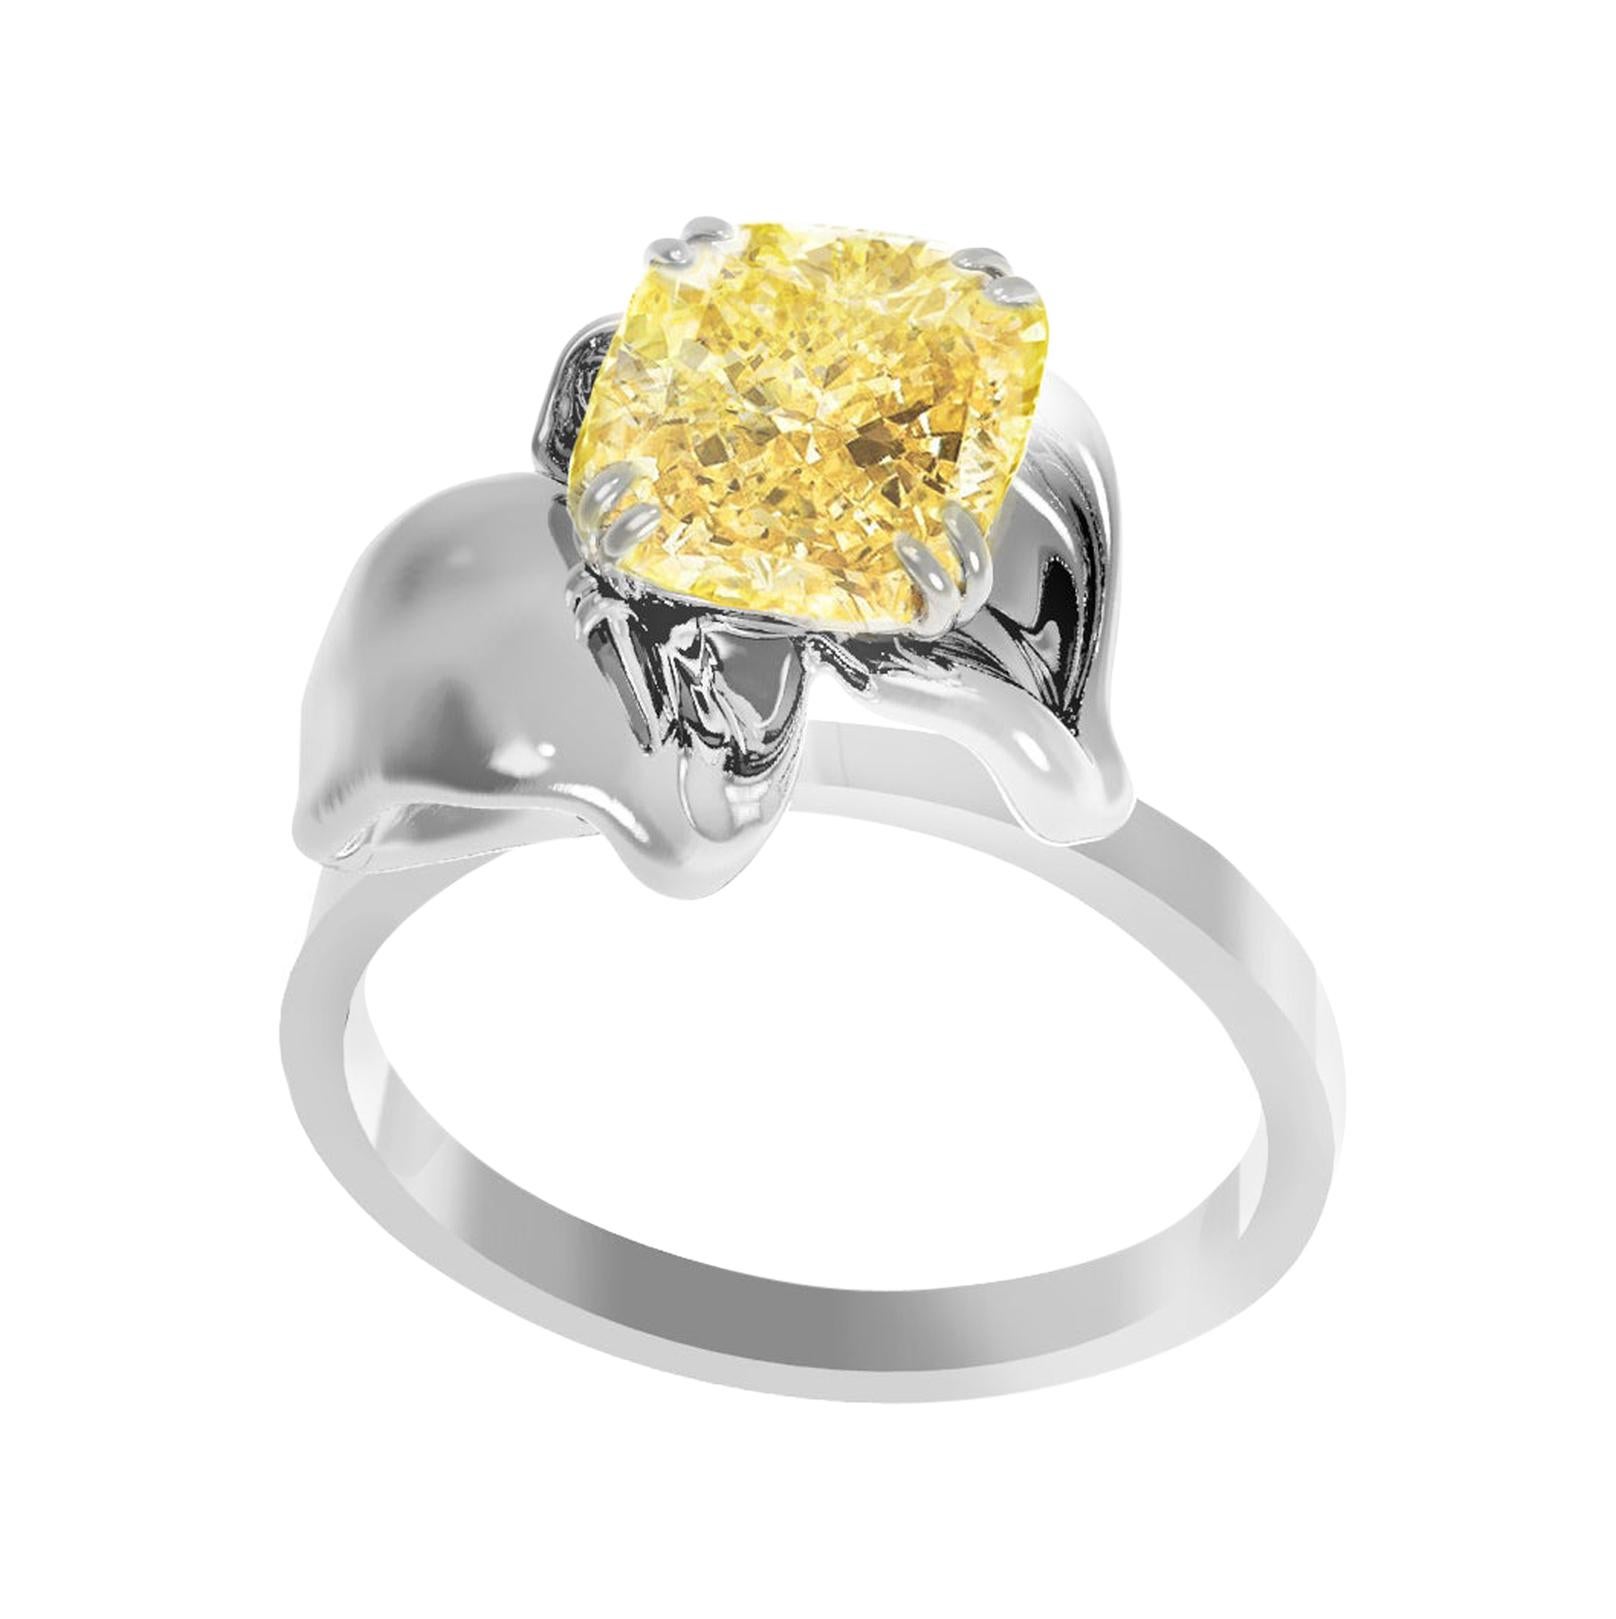 This Flower engagement ring is crafted in 18 karat white gold and features a stunning GIA-certified cushion-cut fancy light yellow diamond with a crushed ice effect. The ring is designed to perfection, with excellent cut work for the diamond and